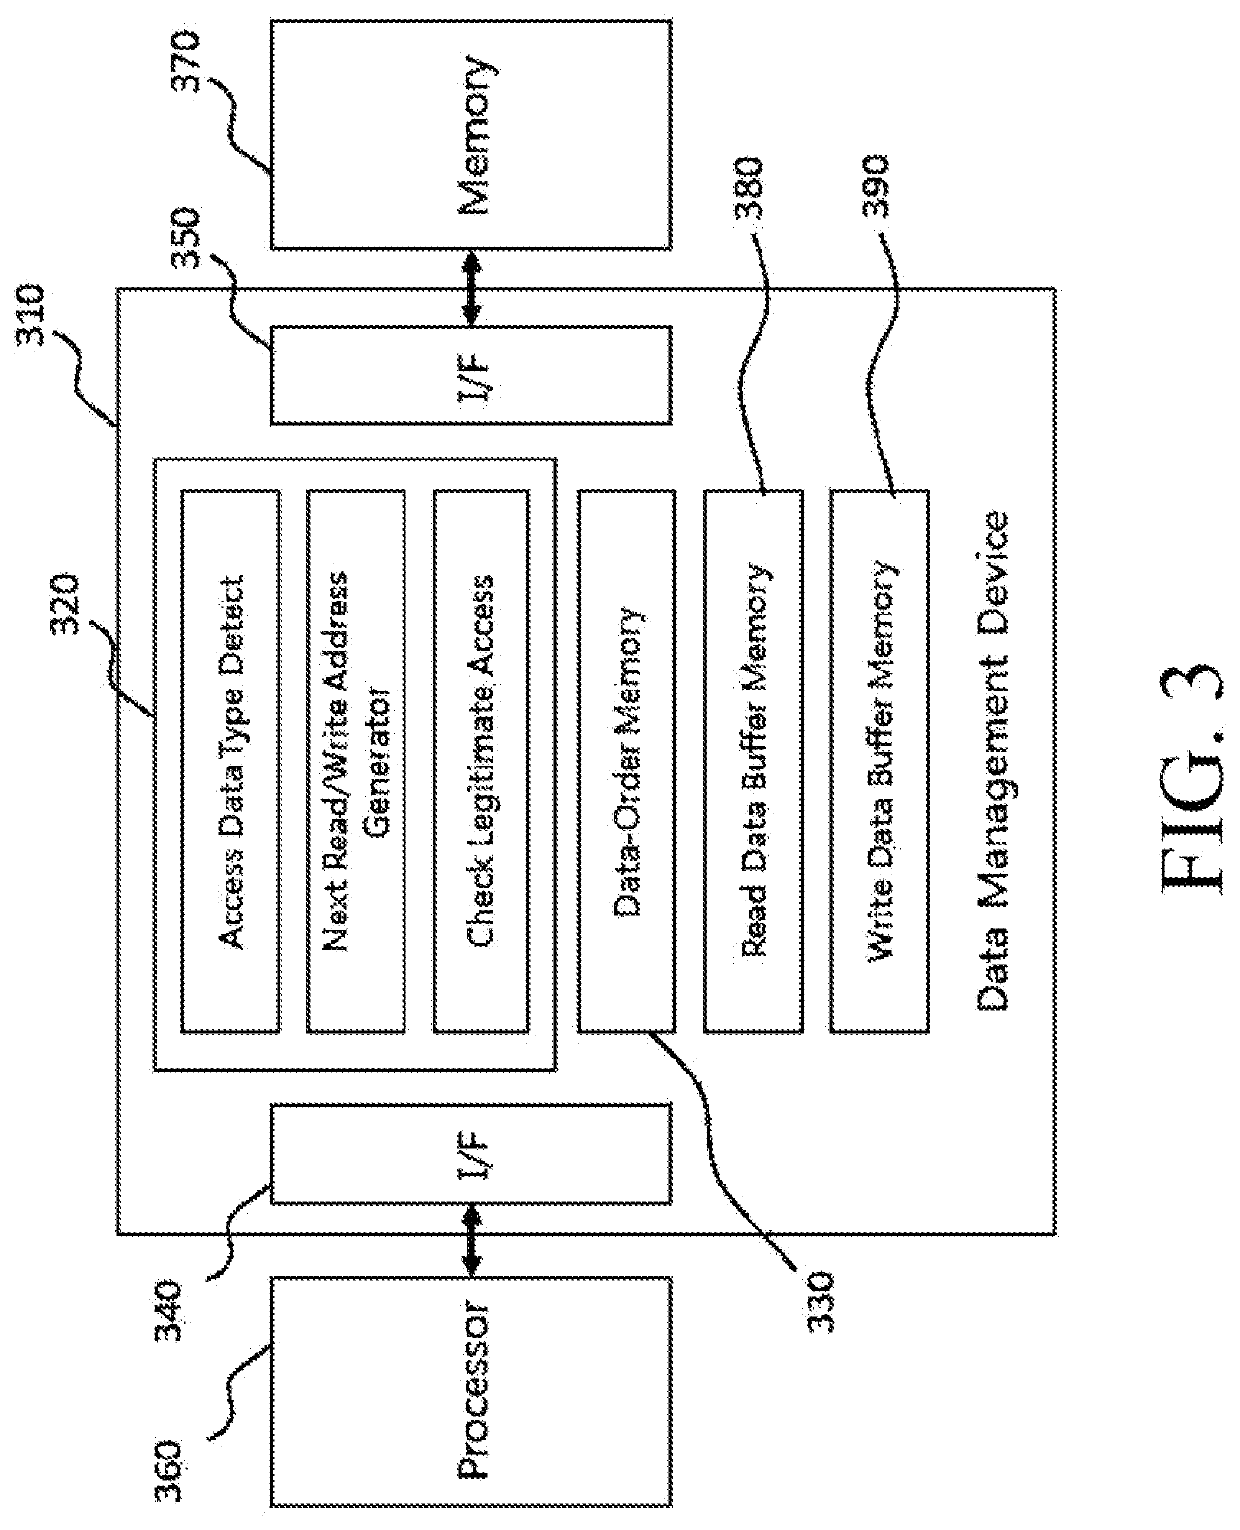 Data management device for supporting high speed artificial neural network operation by using data caching based on data locality of artificial neural network